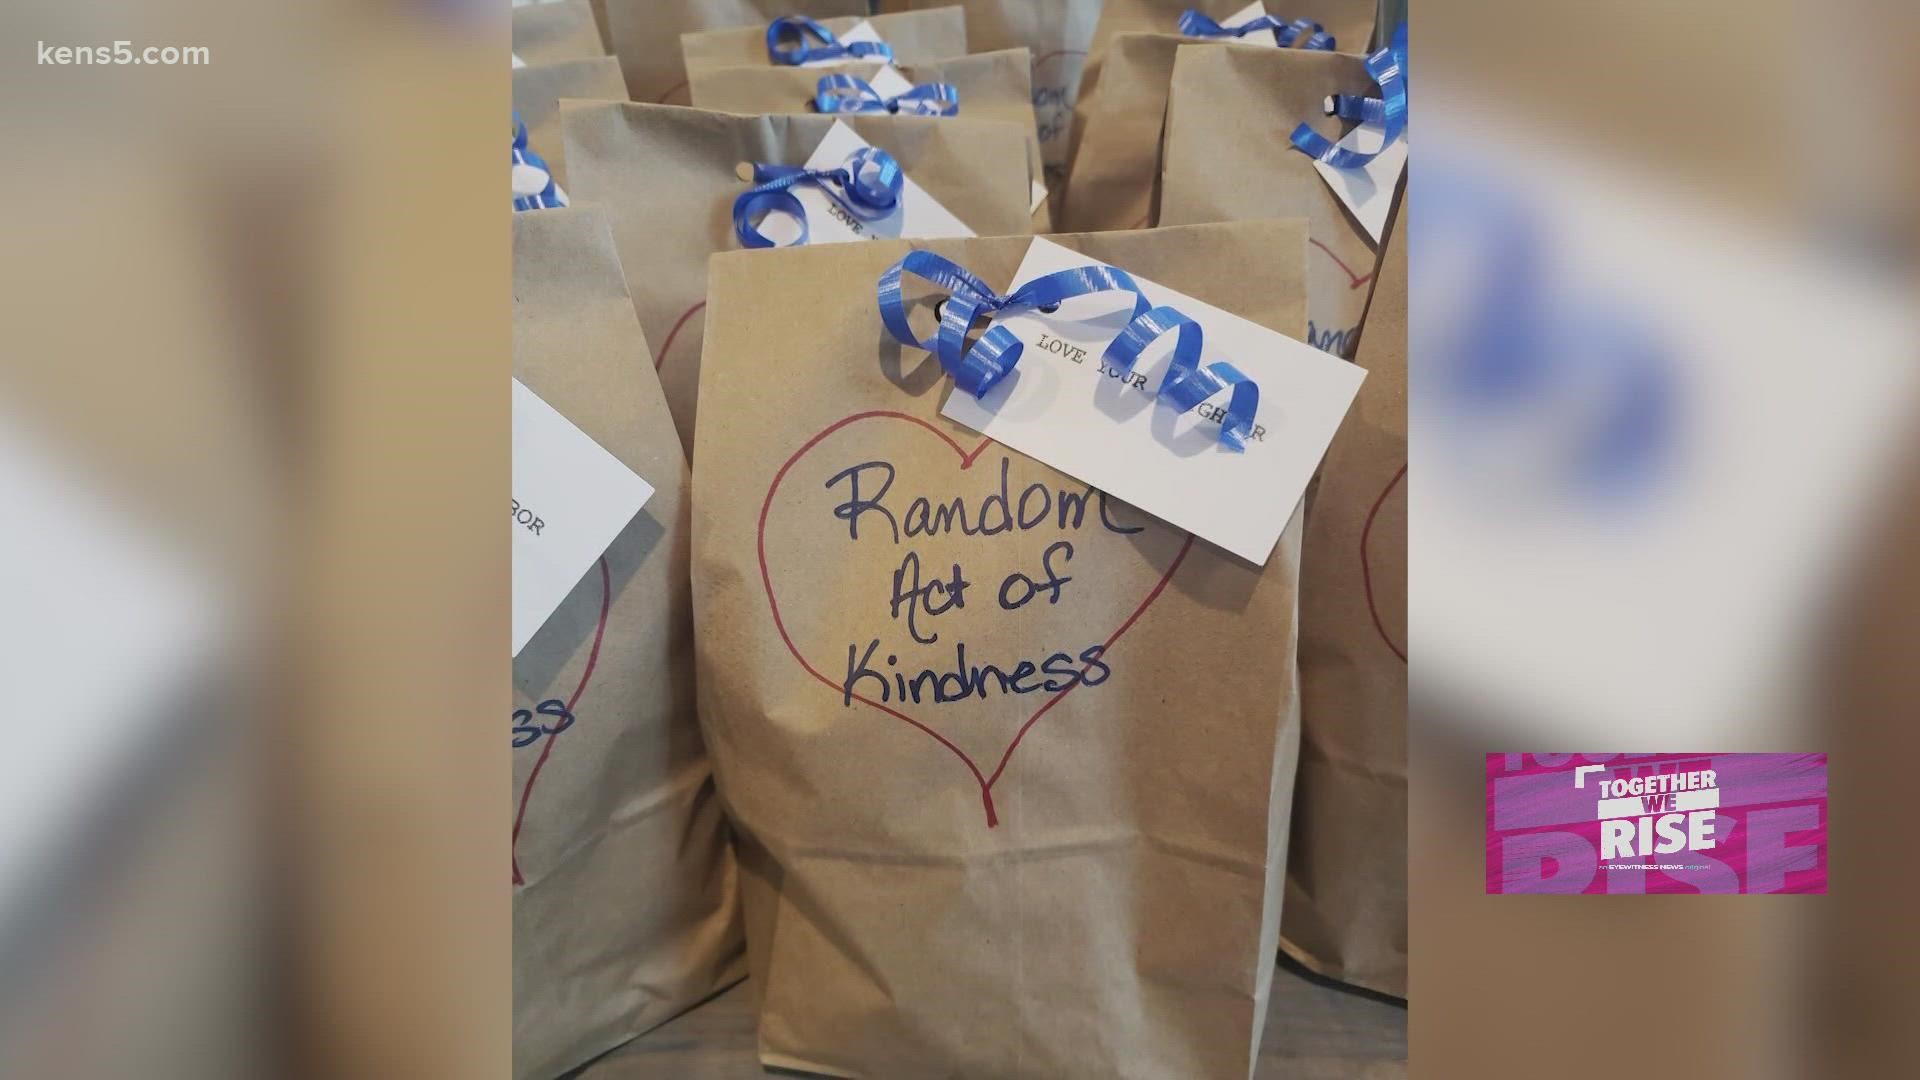 Twelve women in San Antonio finally agreed to interview about six years of random kindness acts. They made the decision, hoping others would do the same.